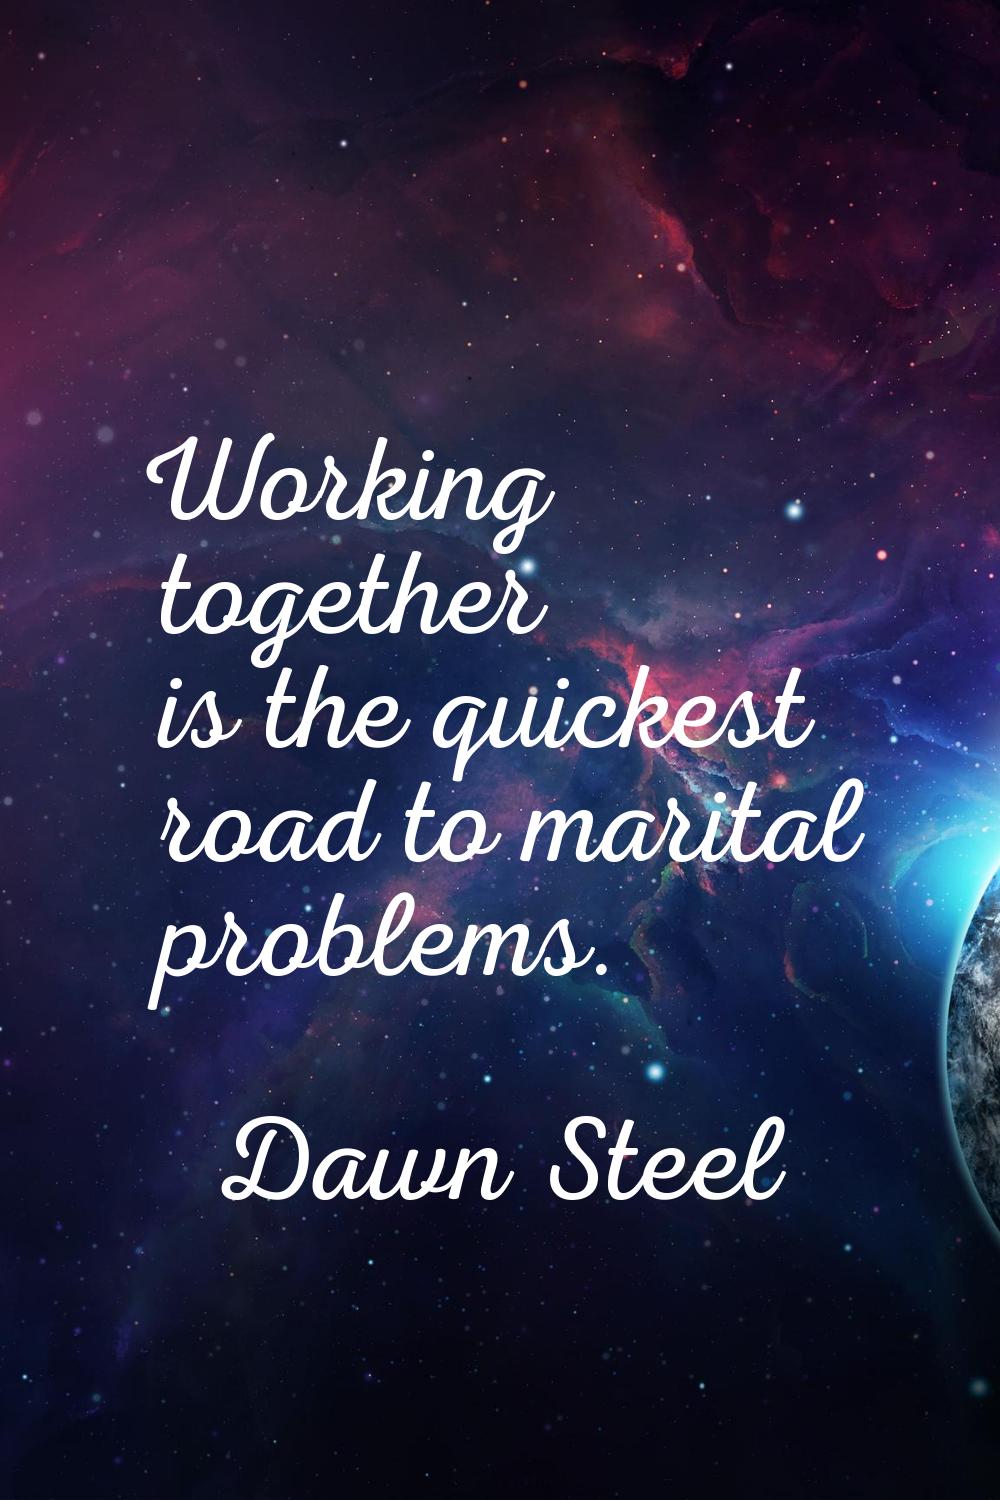 Working together is the quickest road to marital problems.